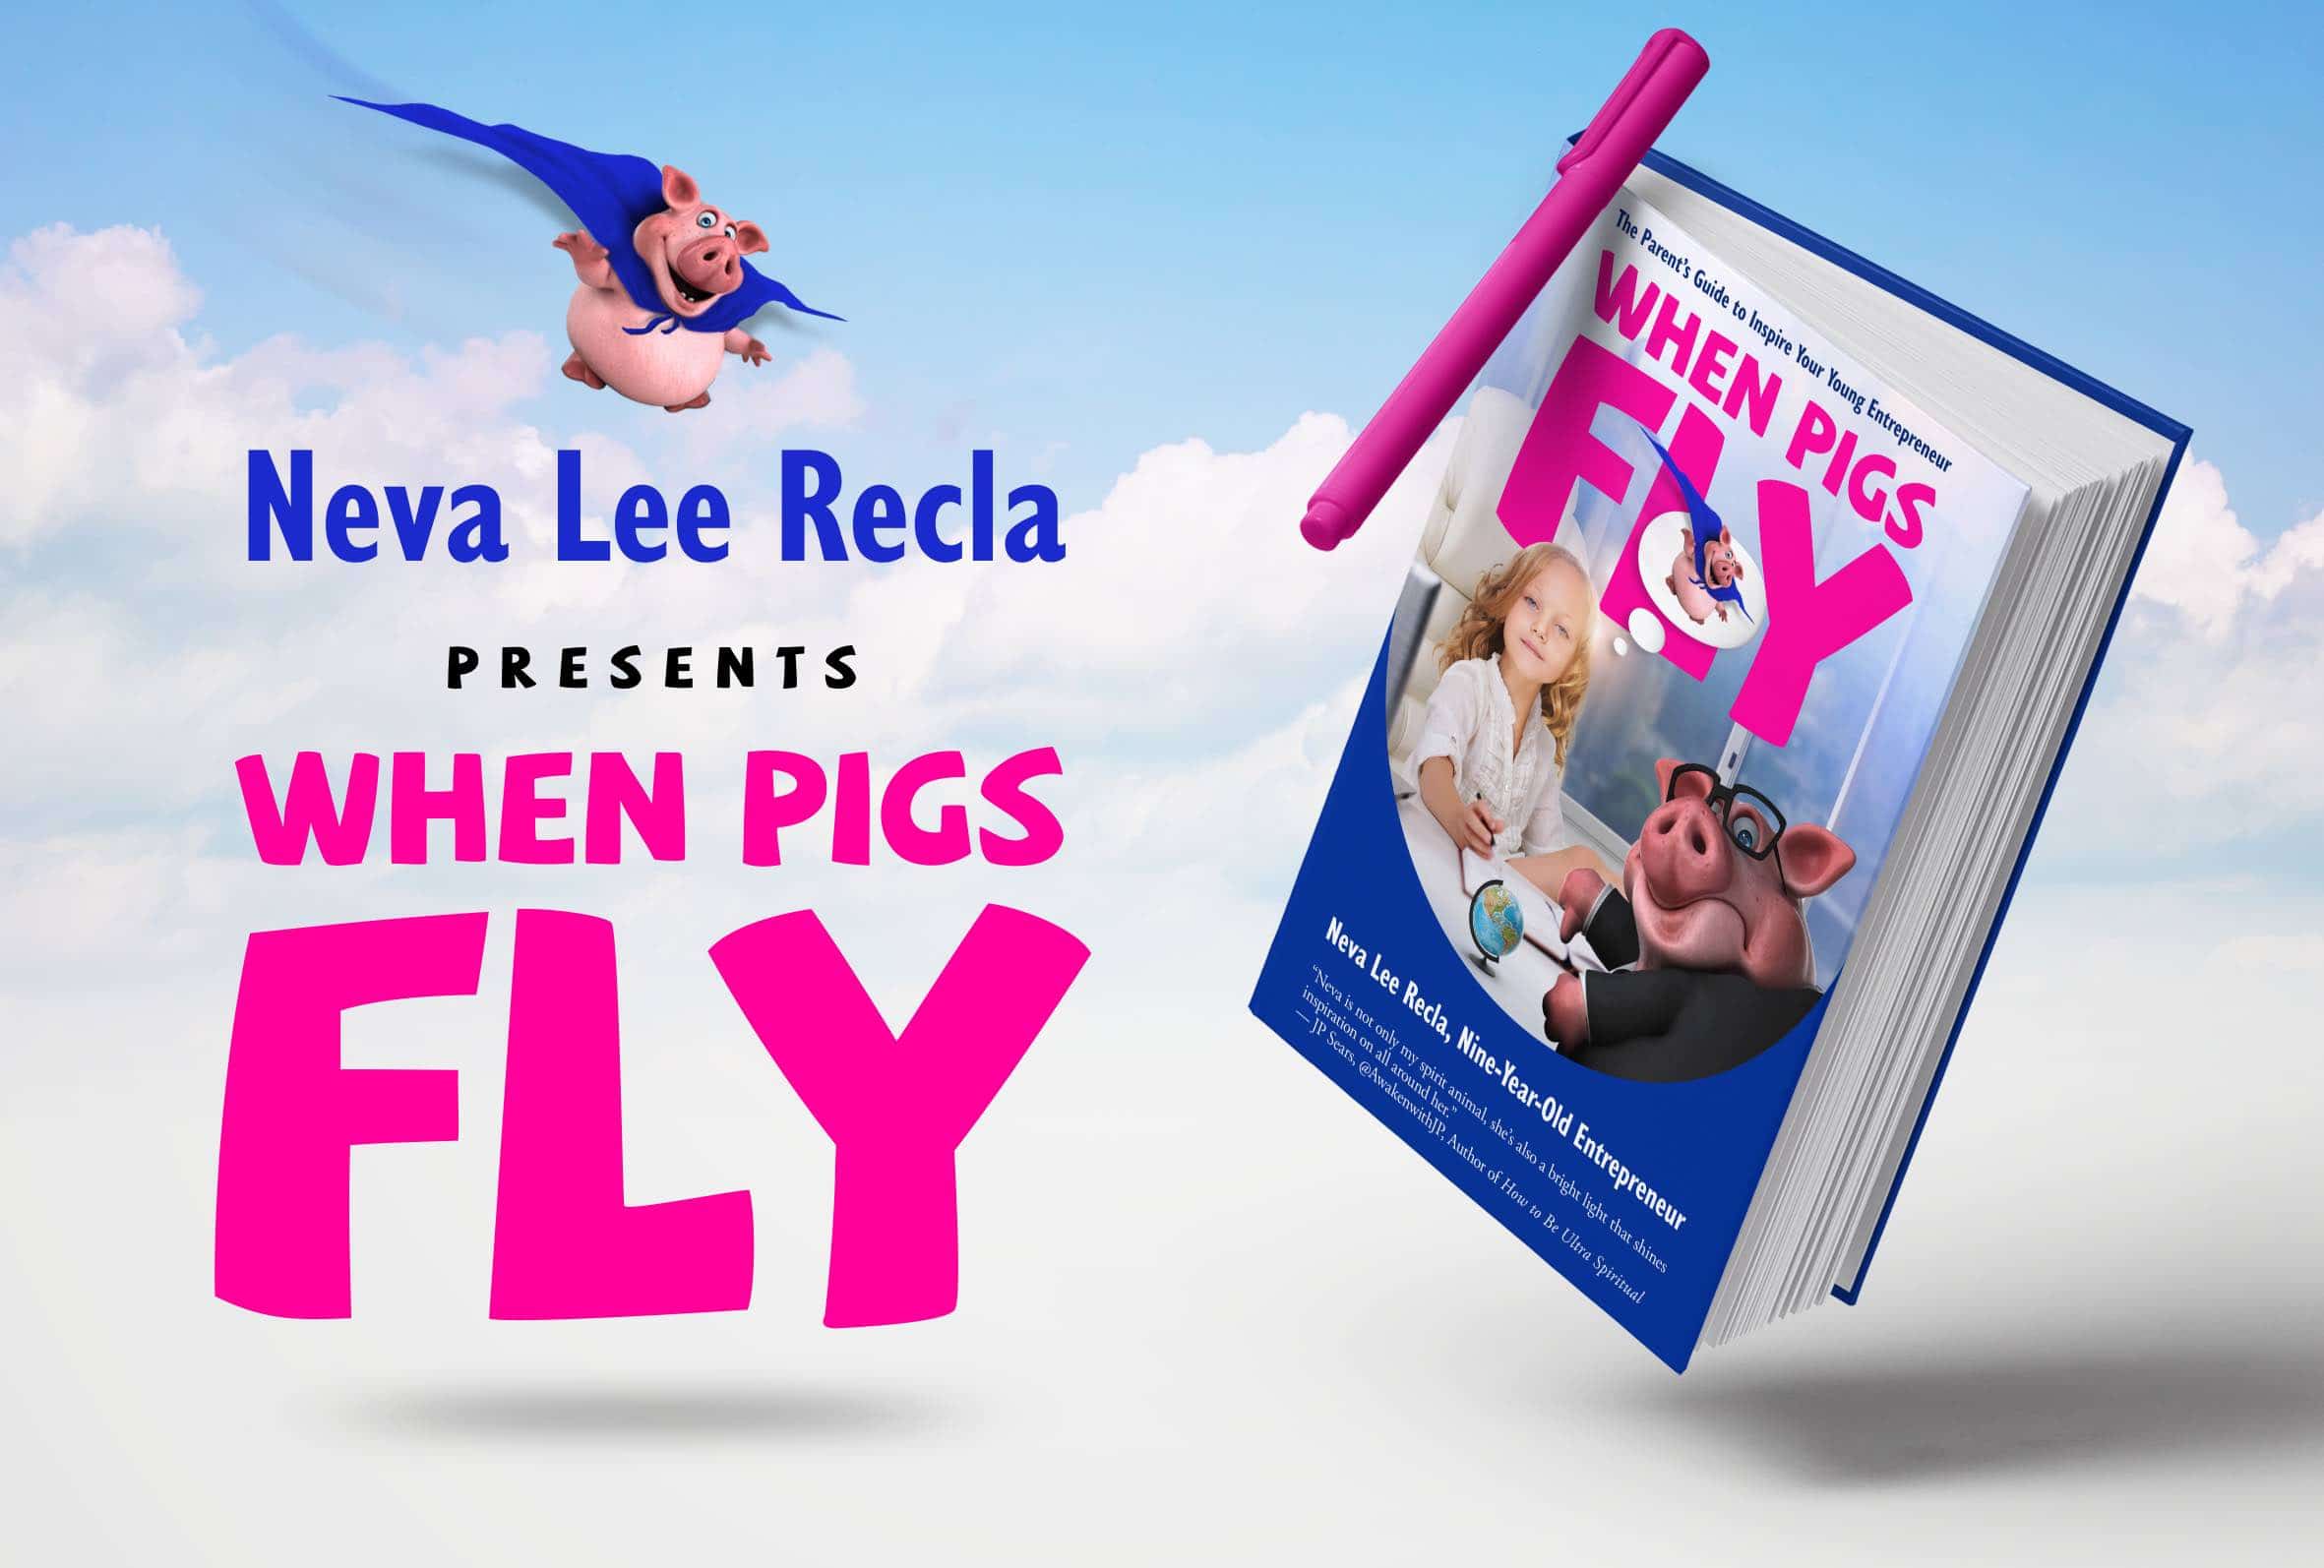 When Pigs Fly the book